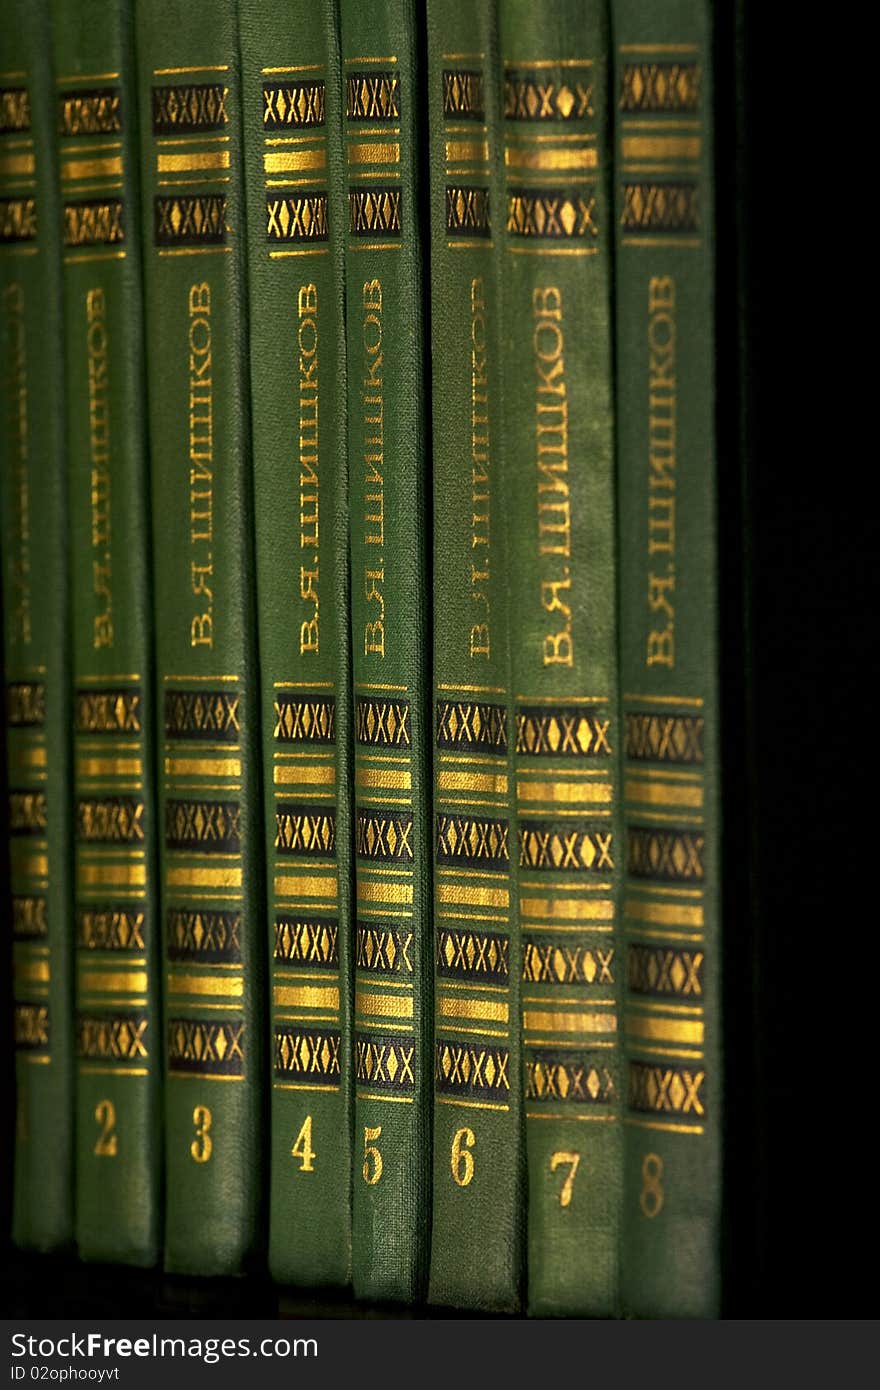 The green and gold book on the shelf. The green and gold book on the shelf